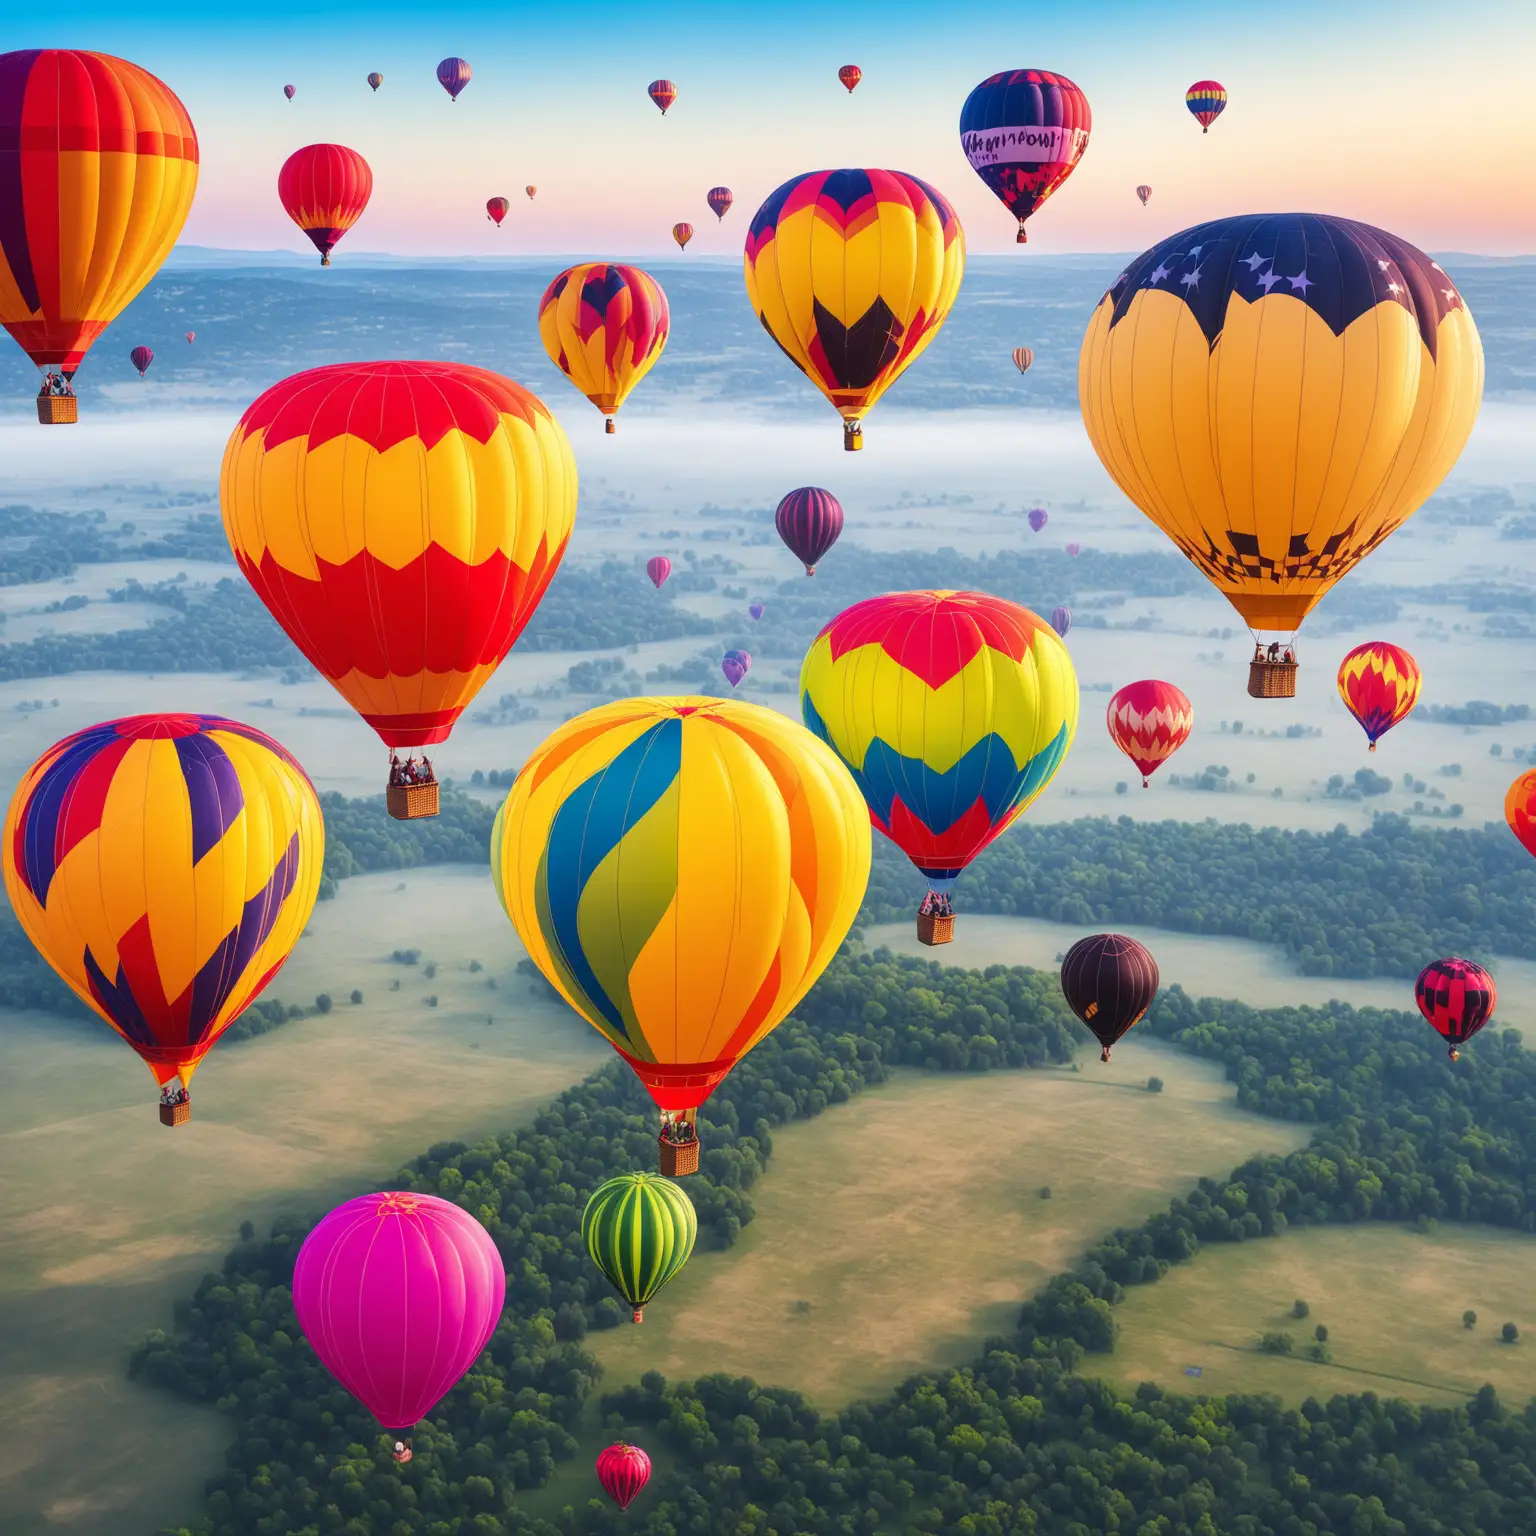 Vibrant Hot Air Balloons Floating in Clear Blue Sky